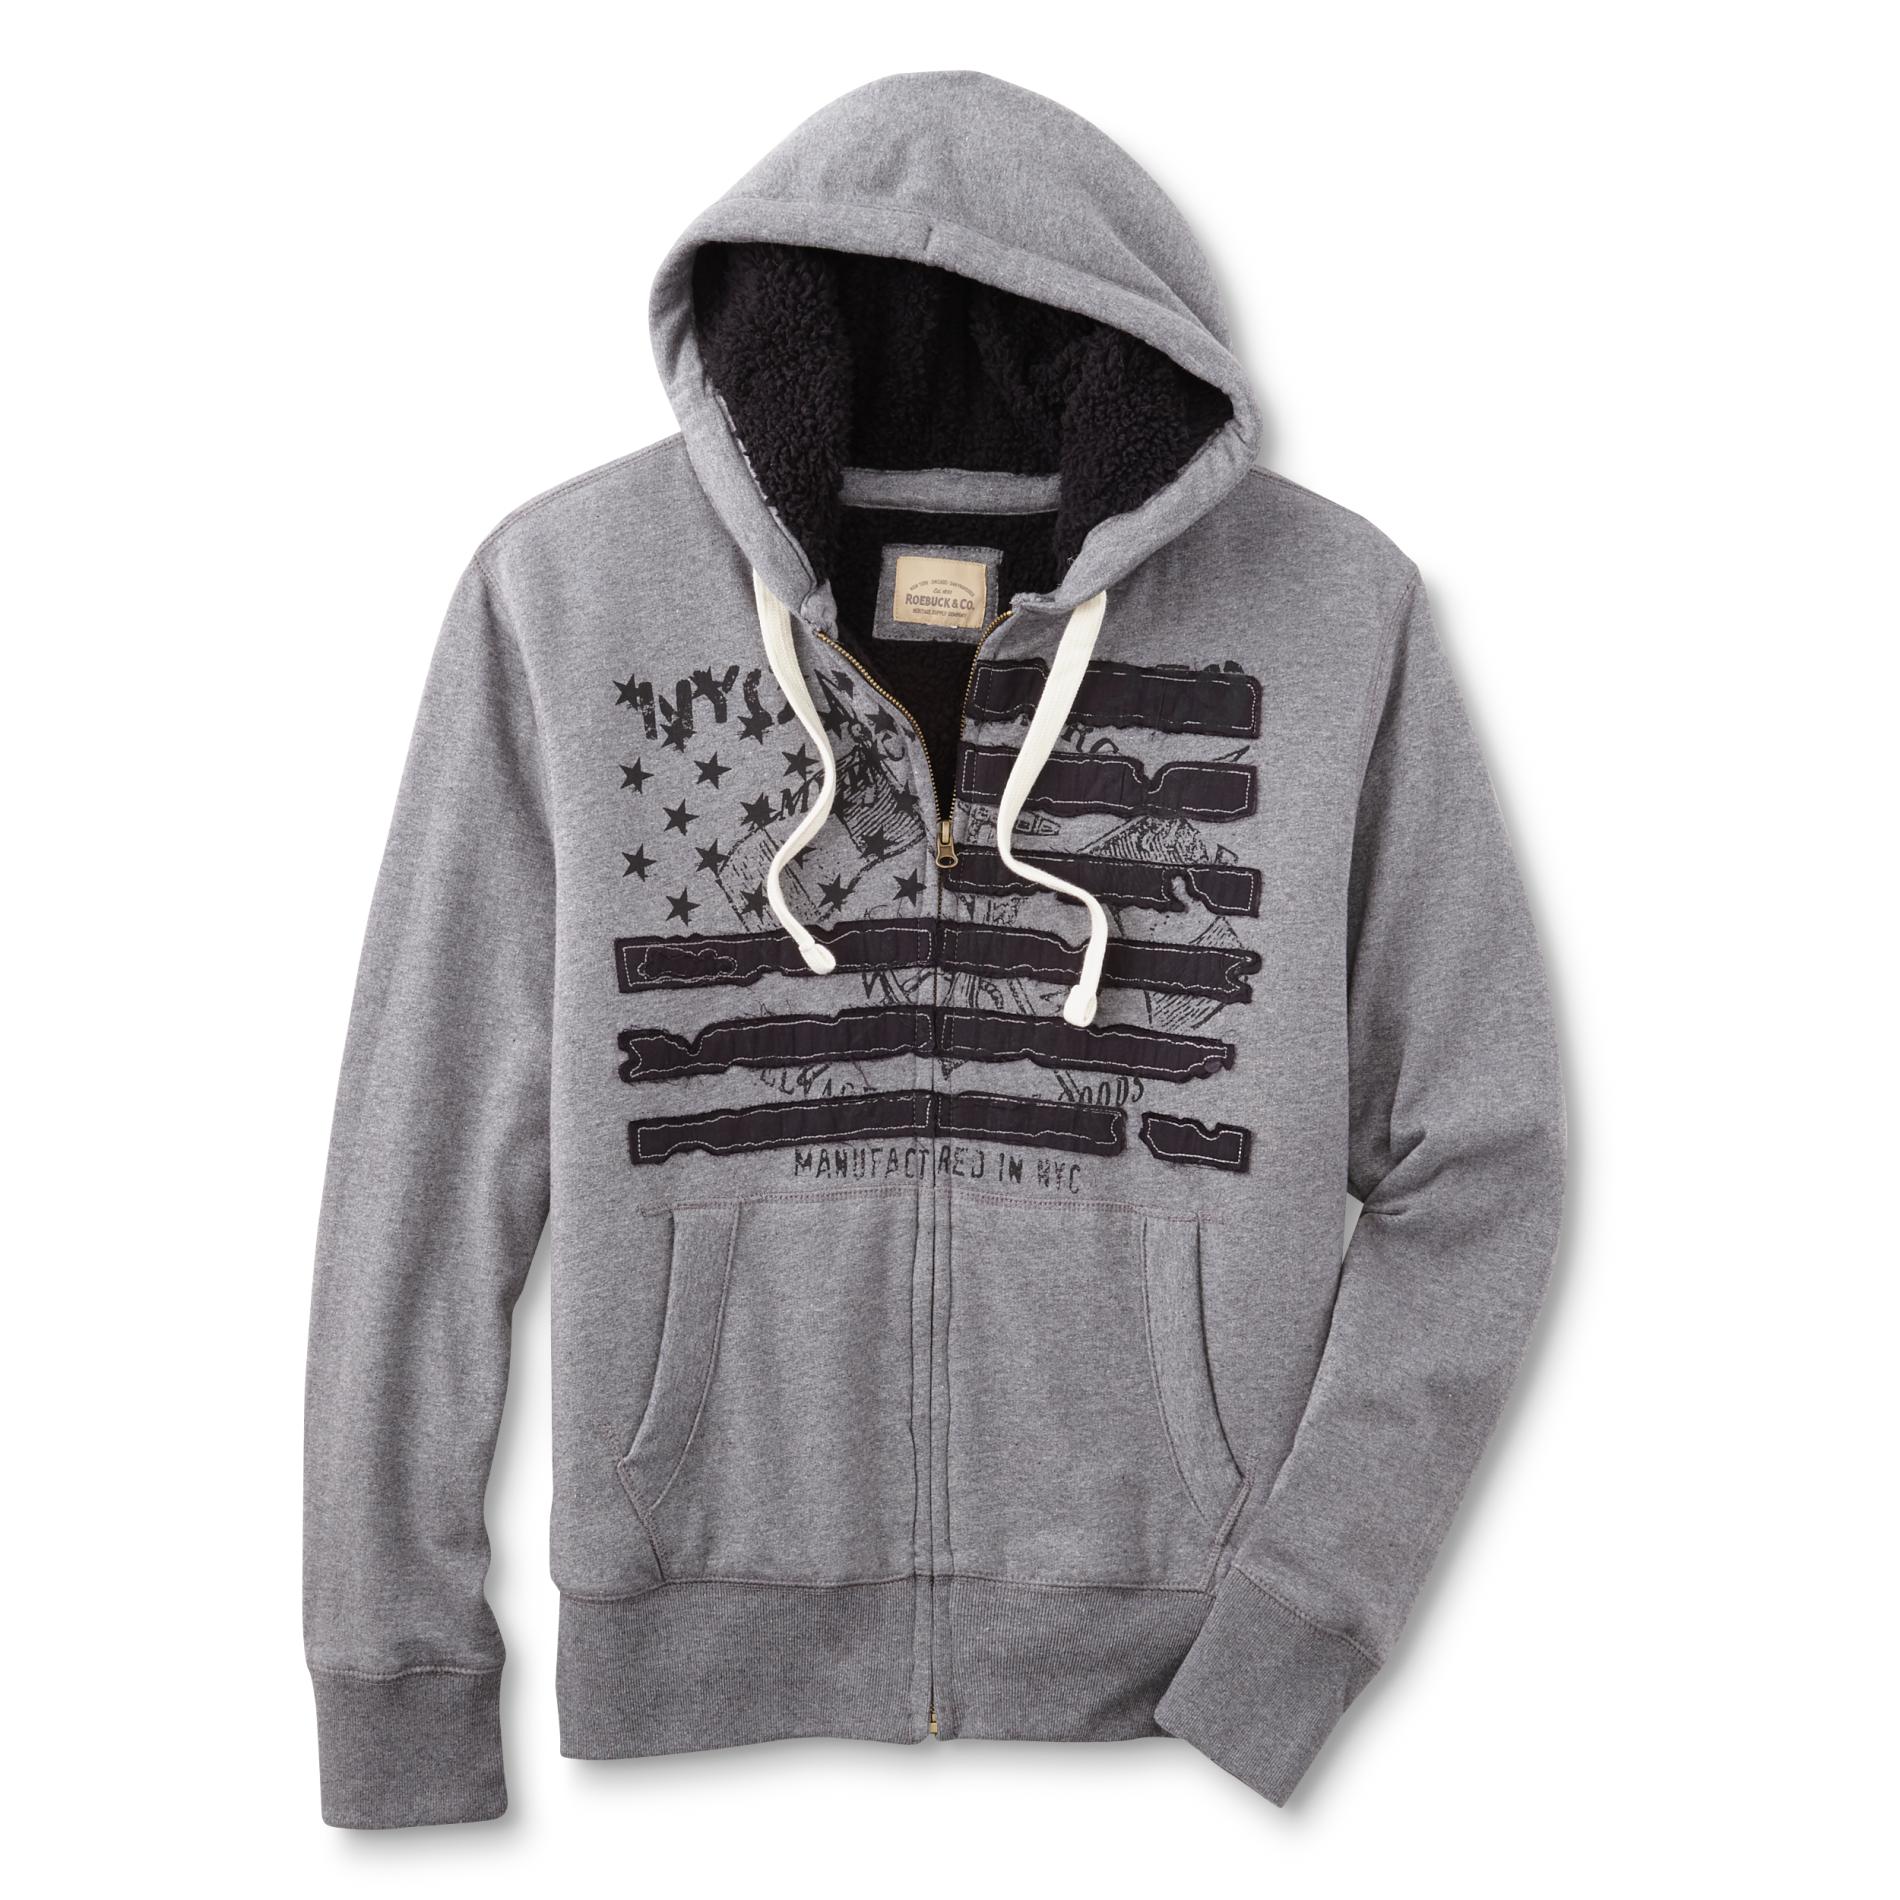 Roebuck & Co. Young Men's Graphic Hoodie Jacket - American Flag